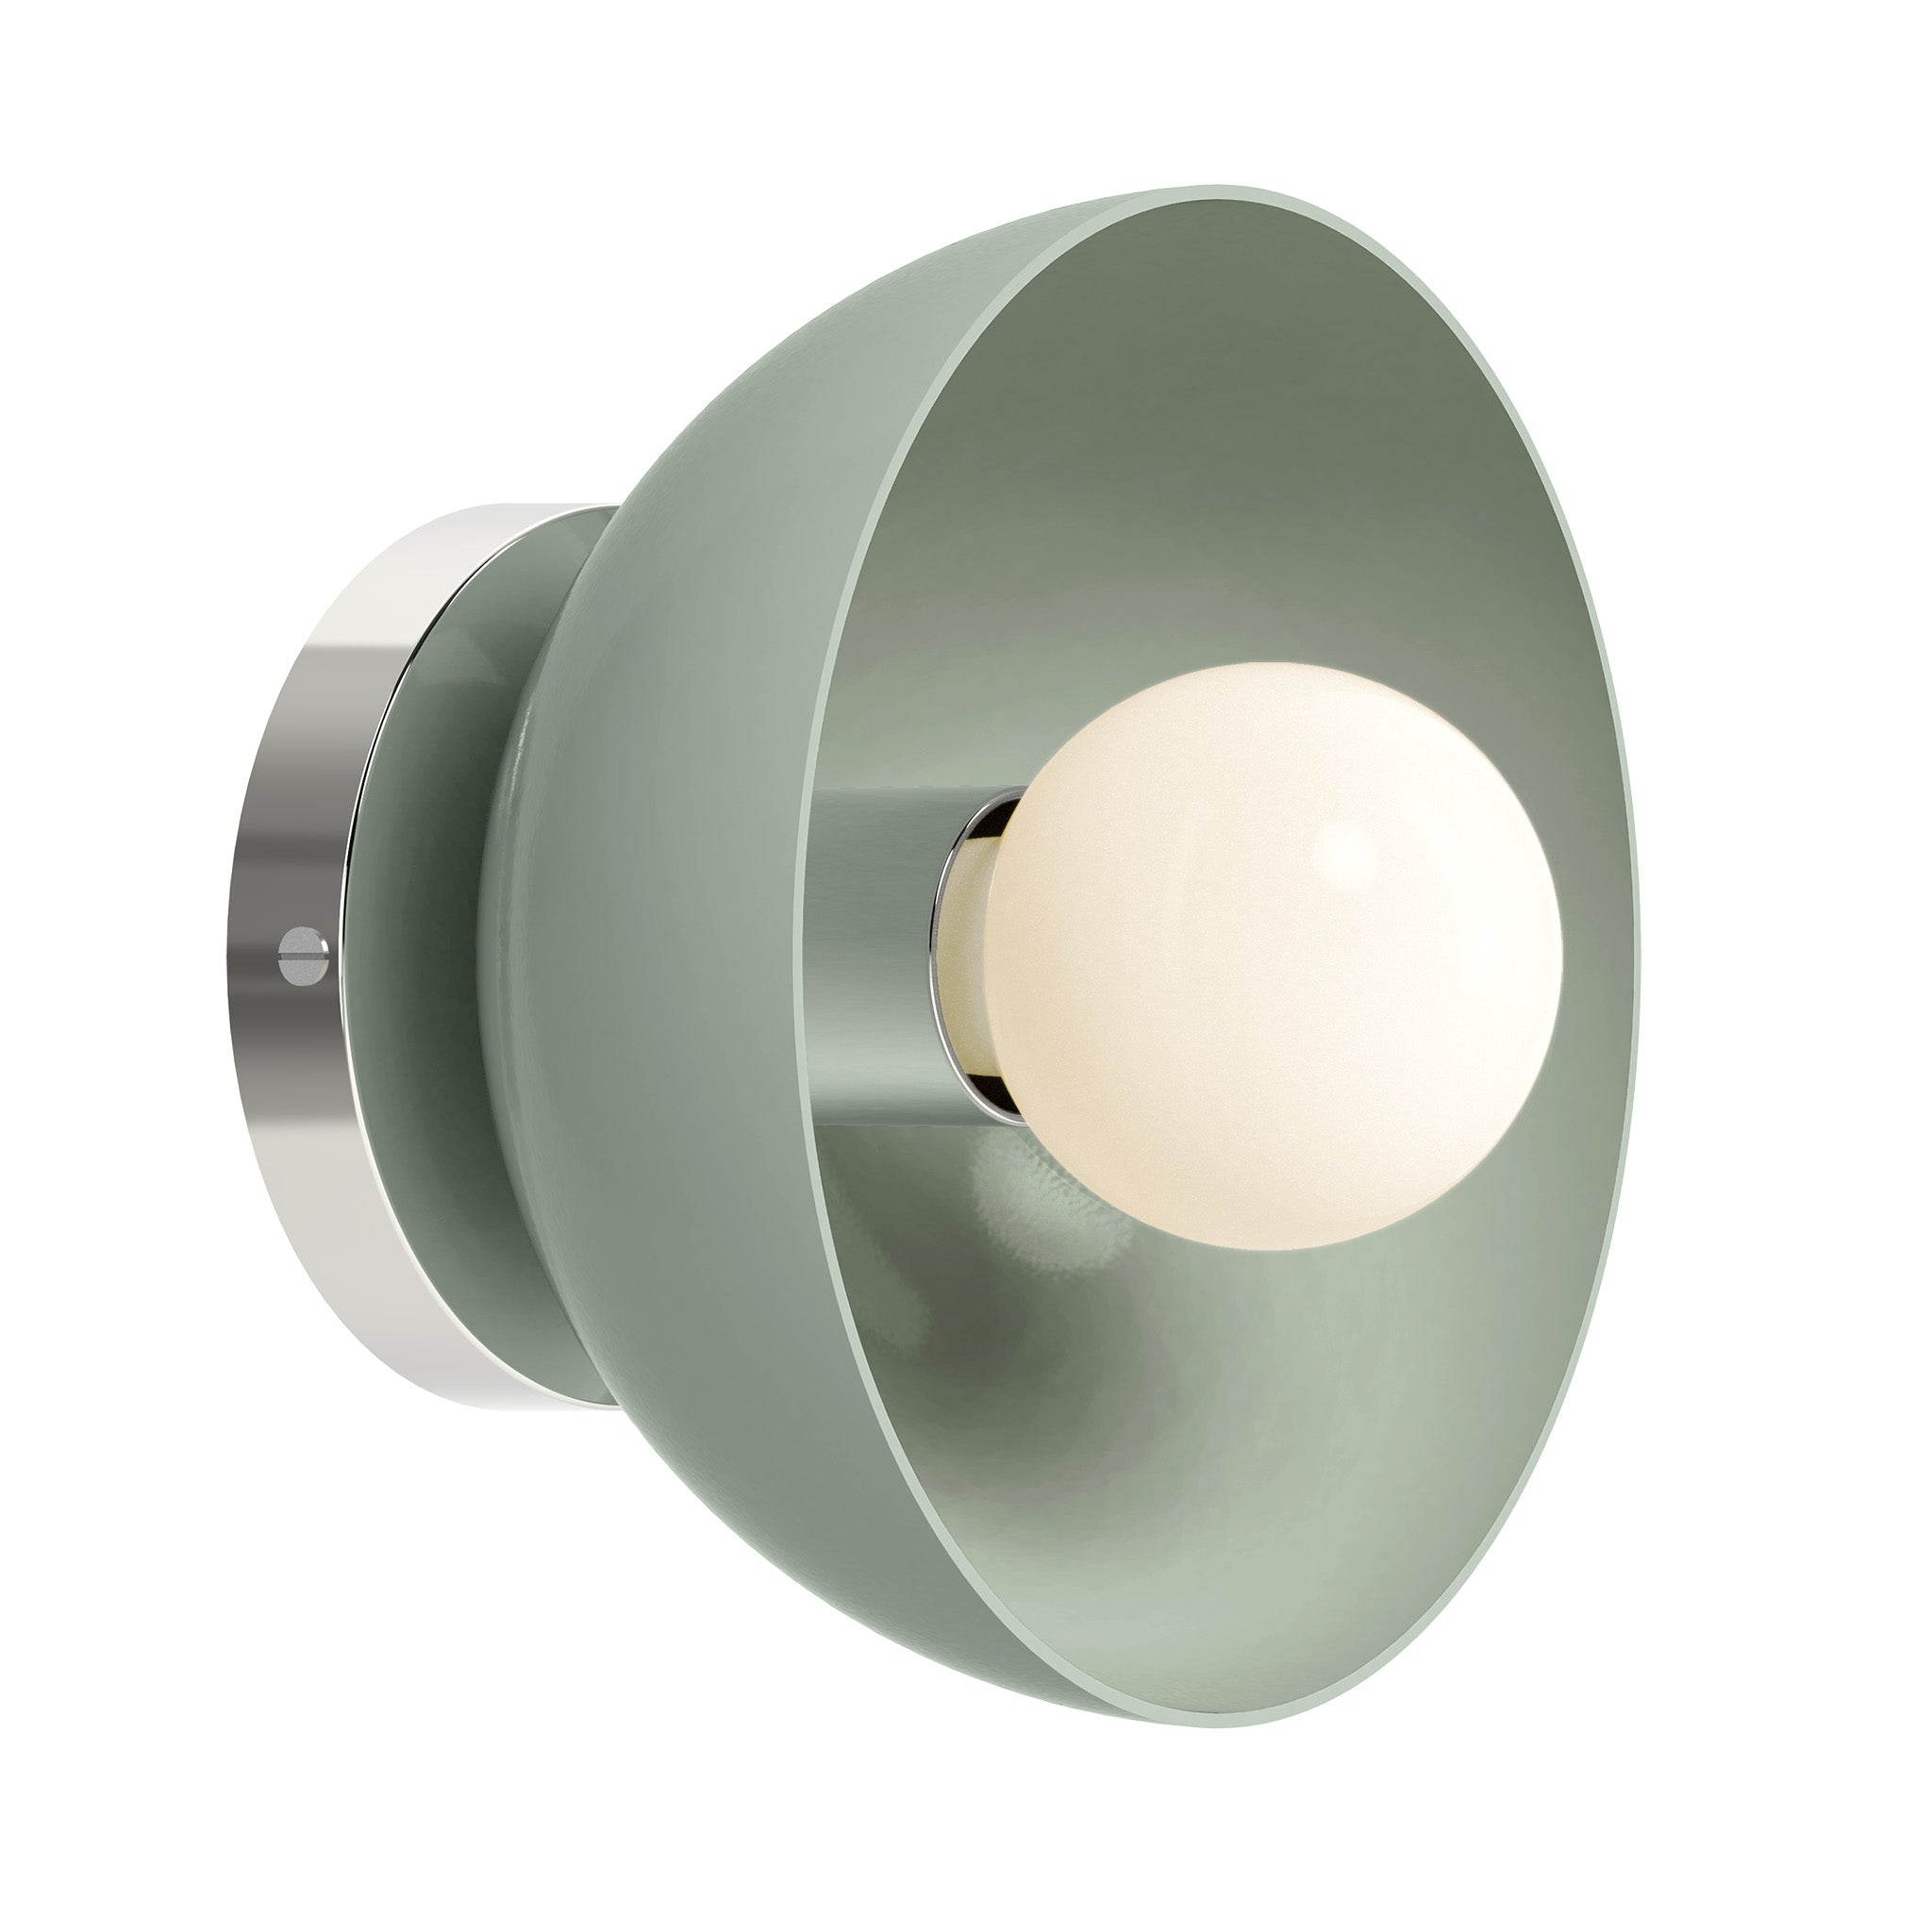 Nickel and spa color Hemi sconce 8" Dutton Brown lighting